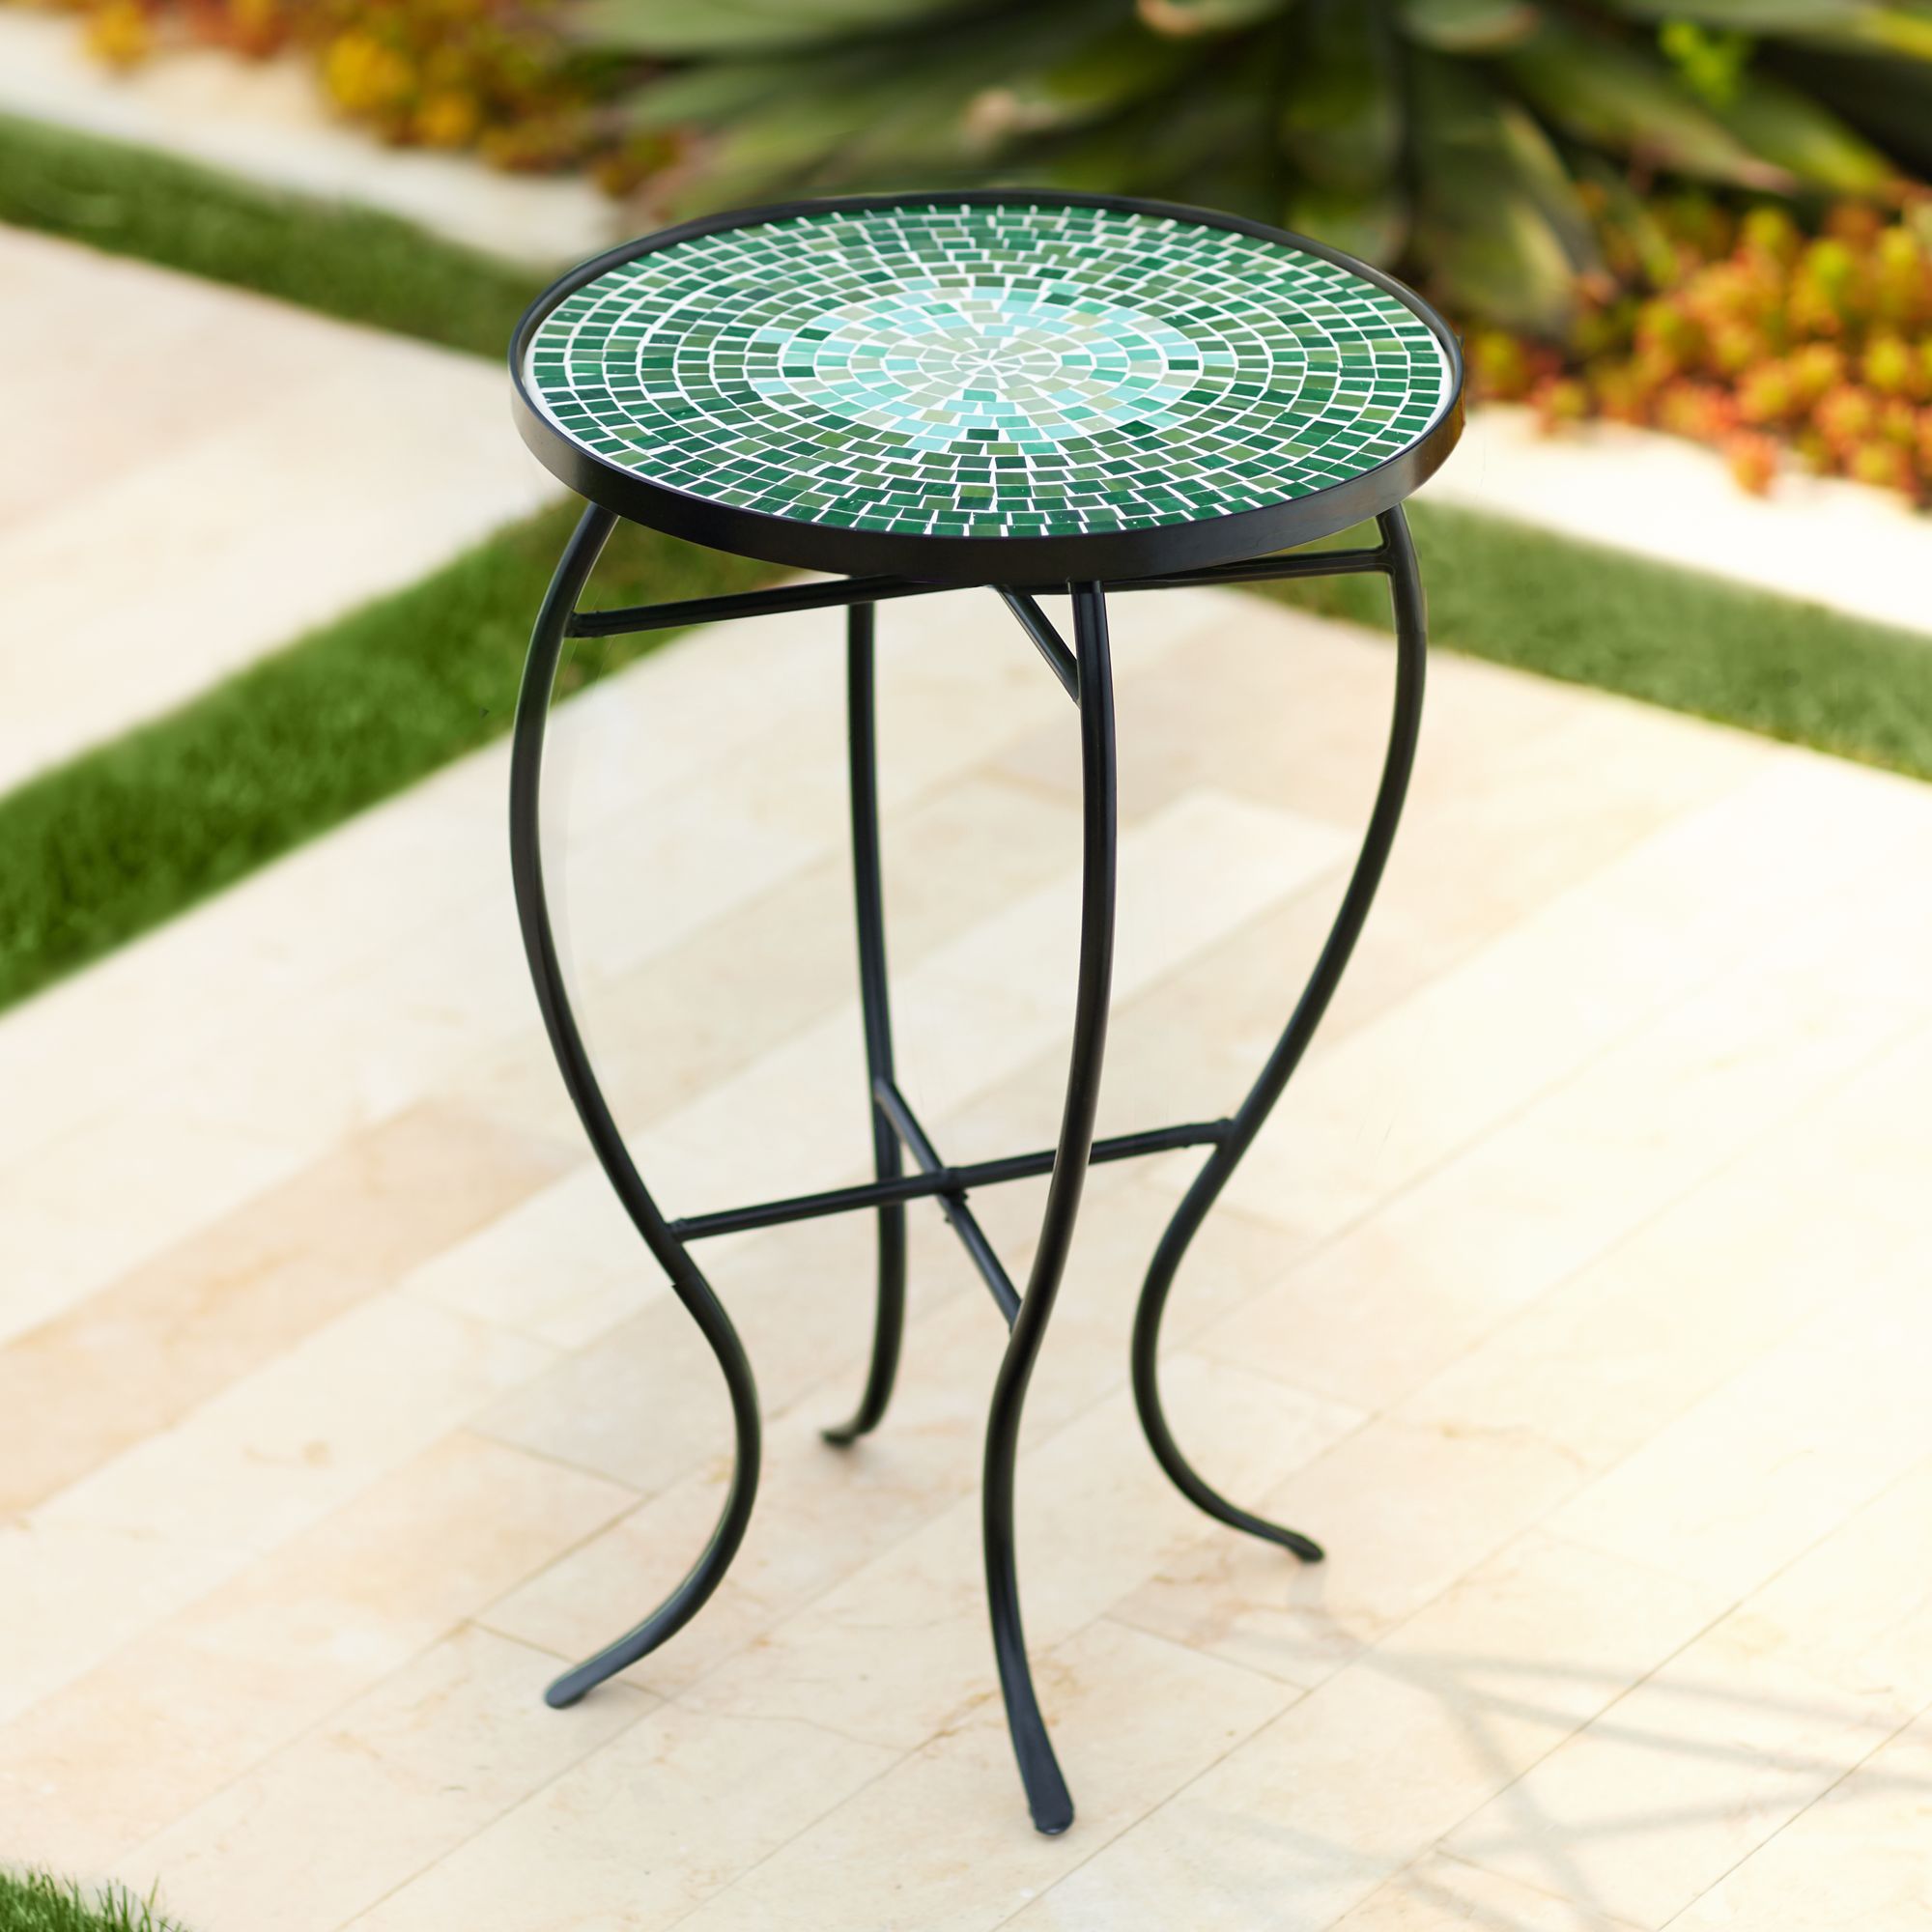 Teal Island Designs Modern Black Round Outdoor Accent Side Table 14" Wide Green Mosaic Front Porch Patio House Balcony Deck Shed - image 1 of 7